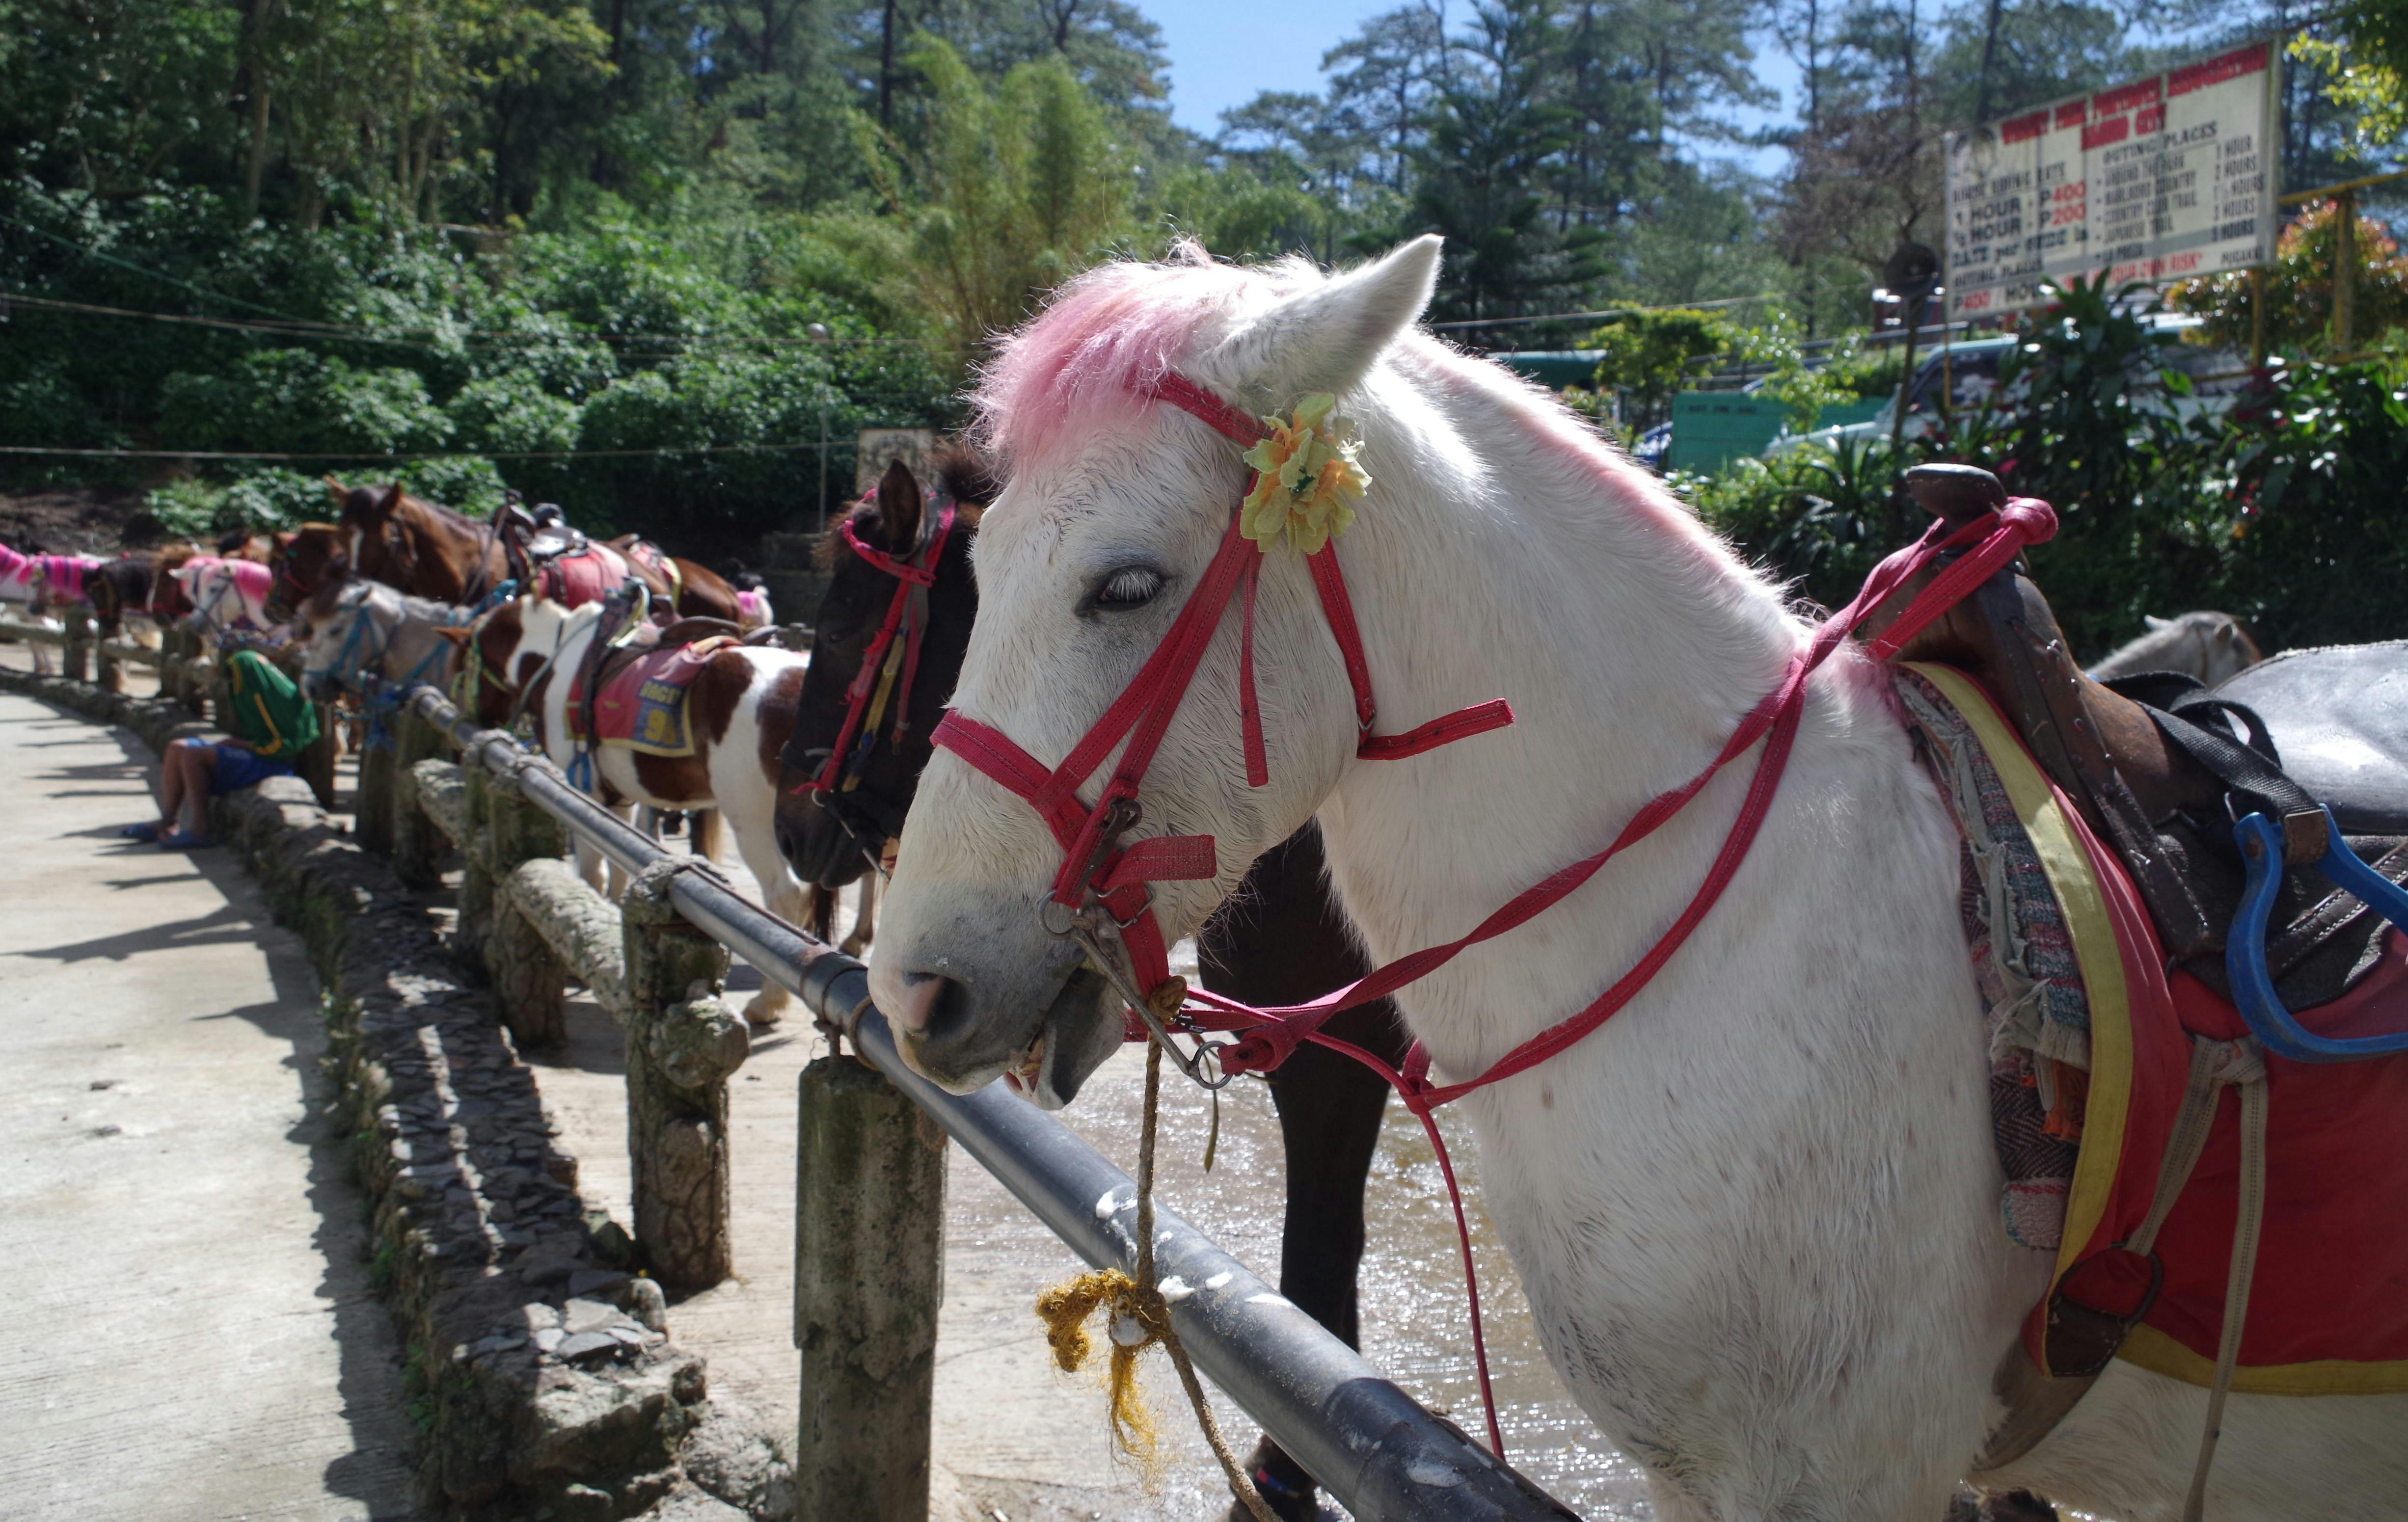 Horse for hire at the Wright Park,Camp John Hay front entrance, part of Cultural & Heritage Tour